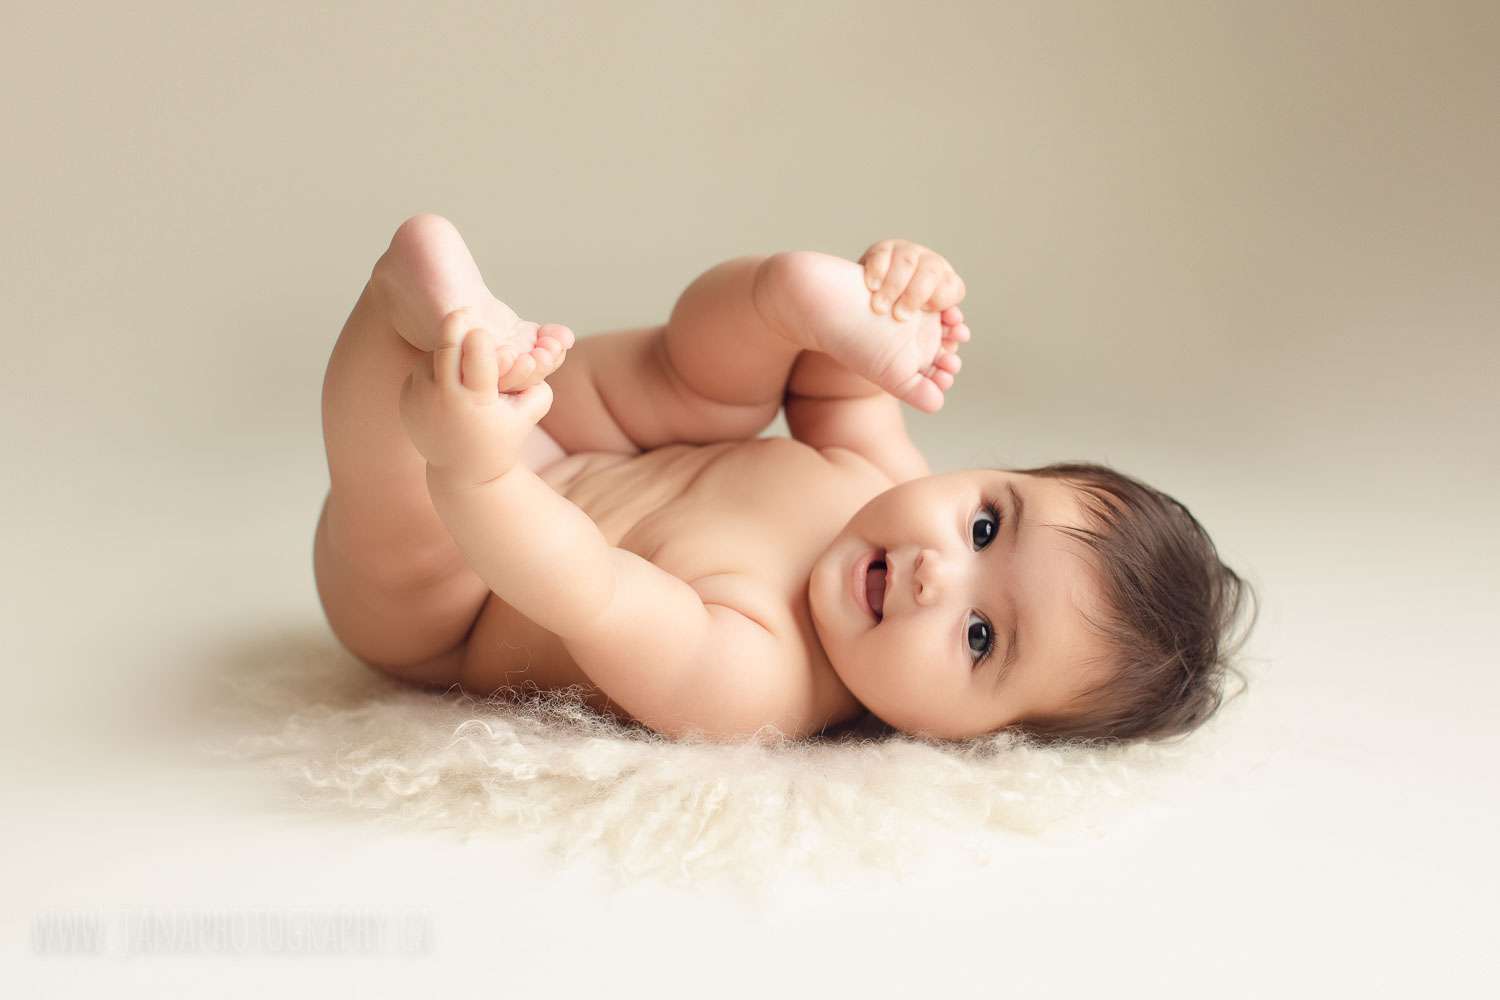 Six month old baby girl naked holding her feet